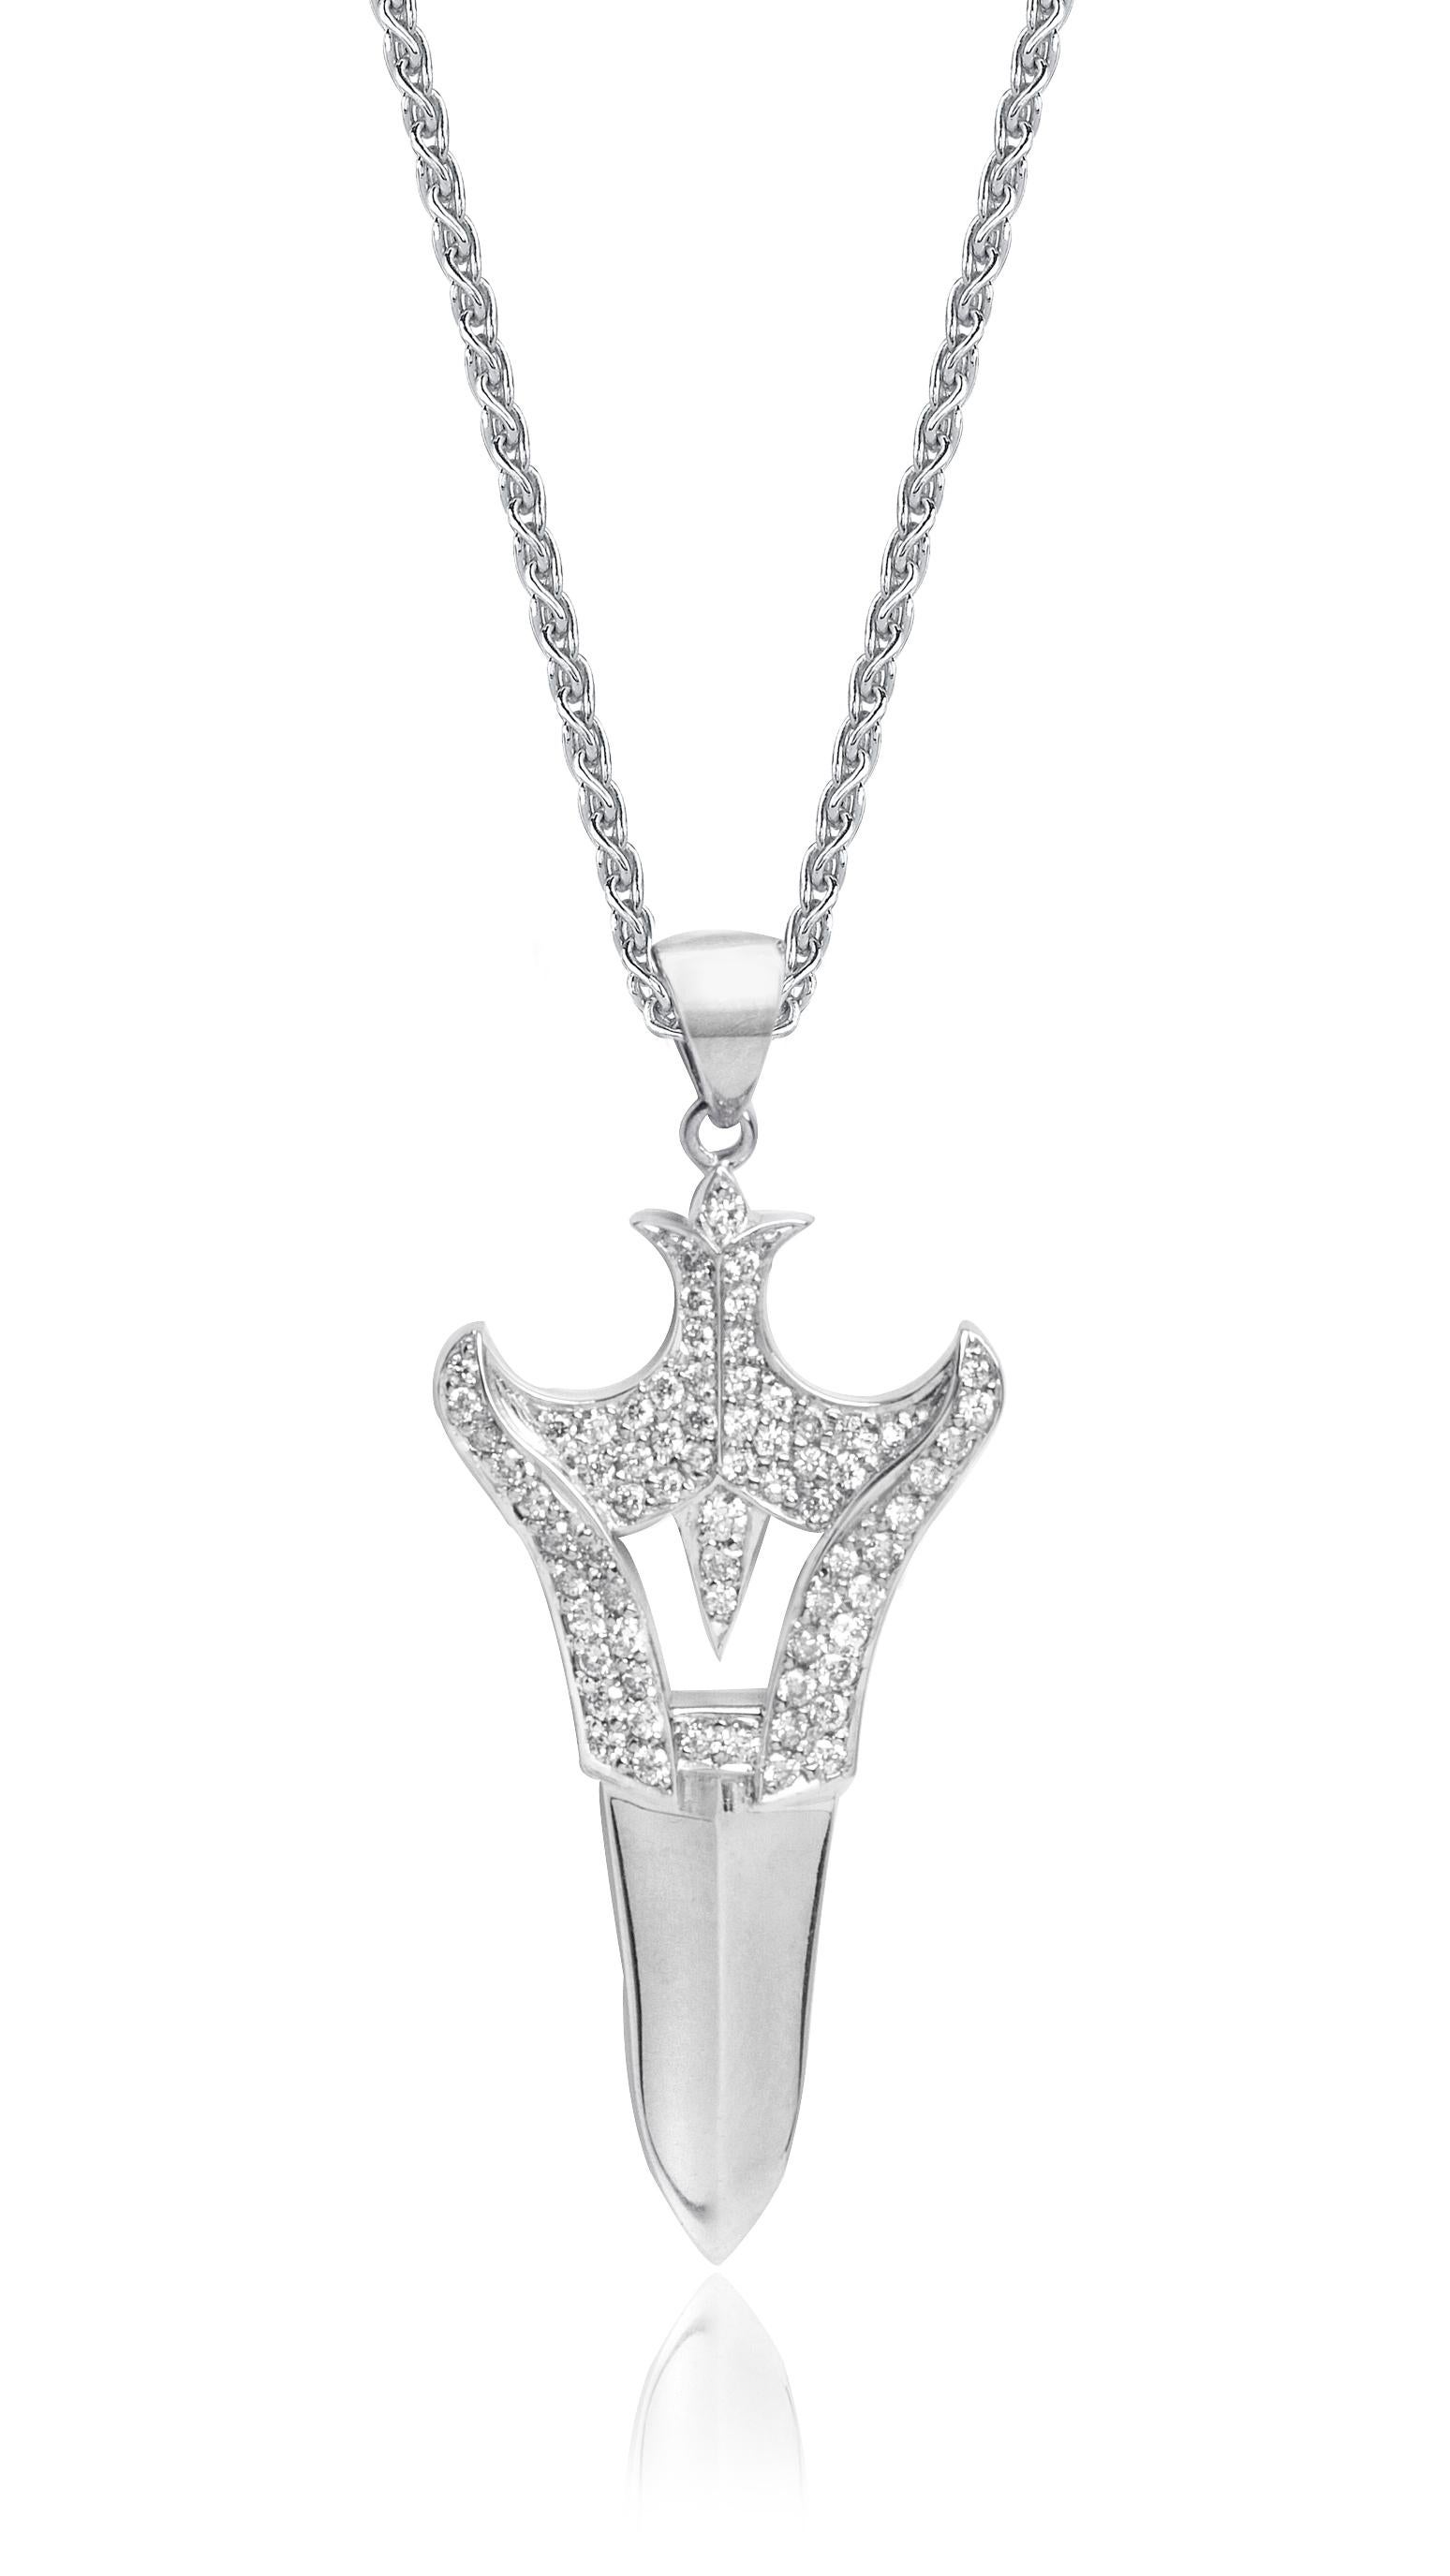 White Diamond White Gold Dagger Pendant Necklace
White Diamonds set on White Gold. 
Available in any stone or gold variation.
Crafted to order. Please allow up to 3 weeks for delivery.